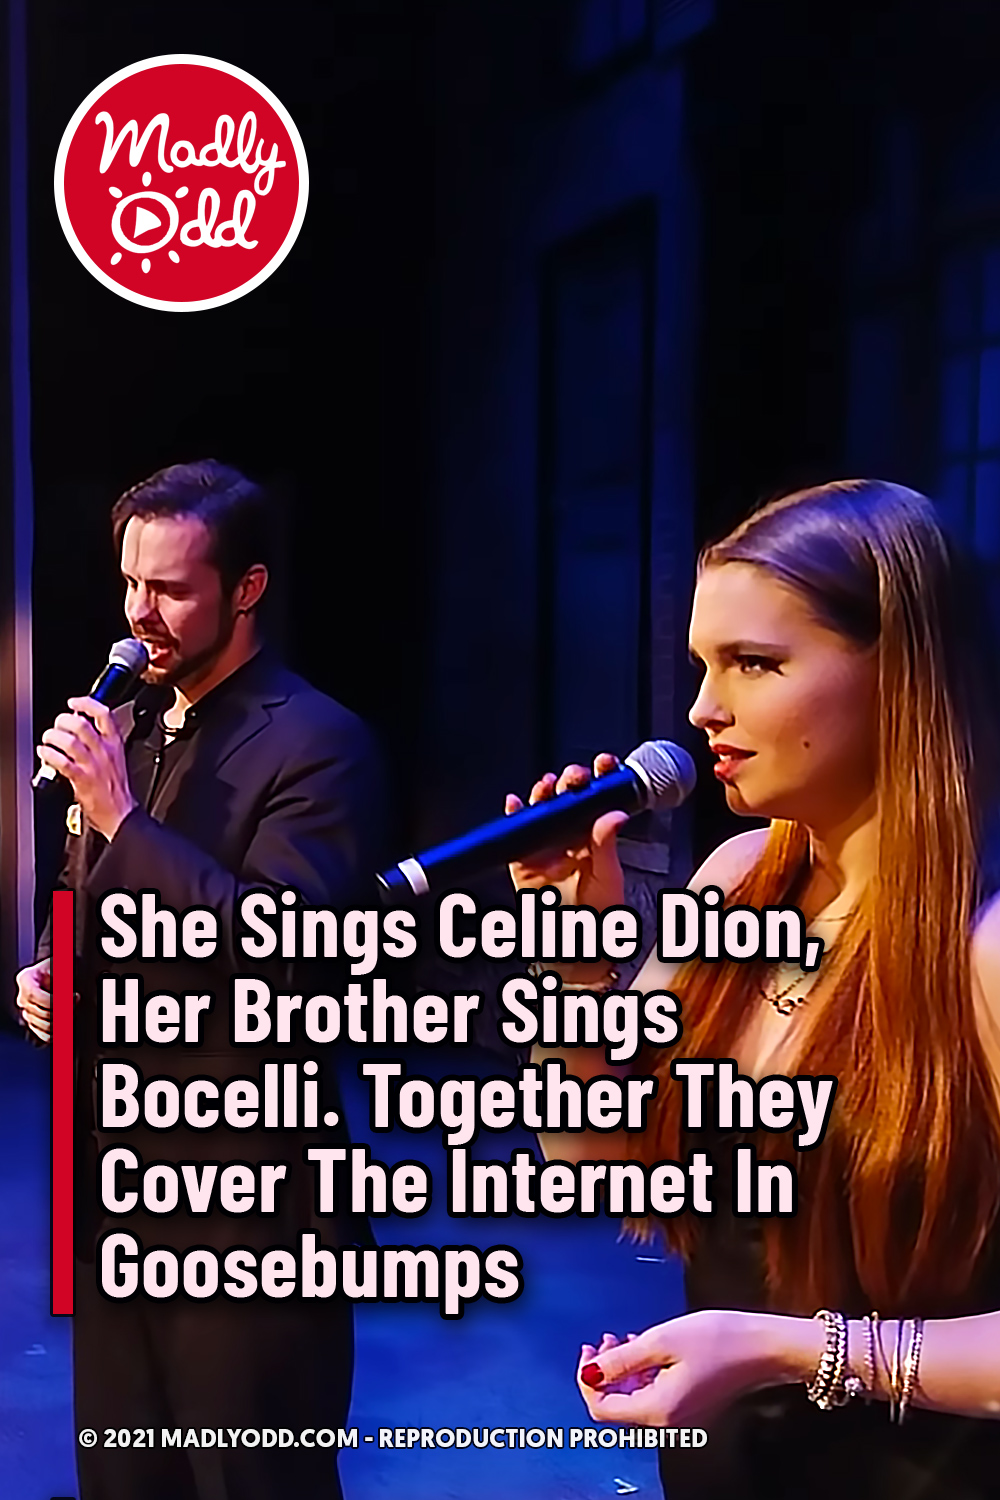 She Sings Celine Dion, Her Brother Sings Bocelli. Together They Cover The Internet In Goosebumps